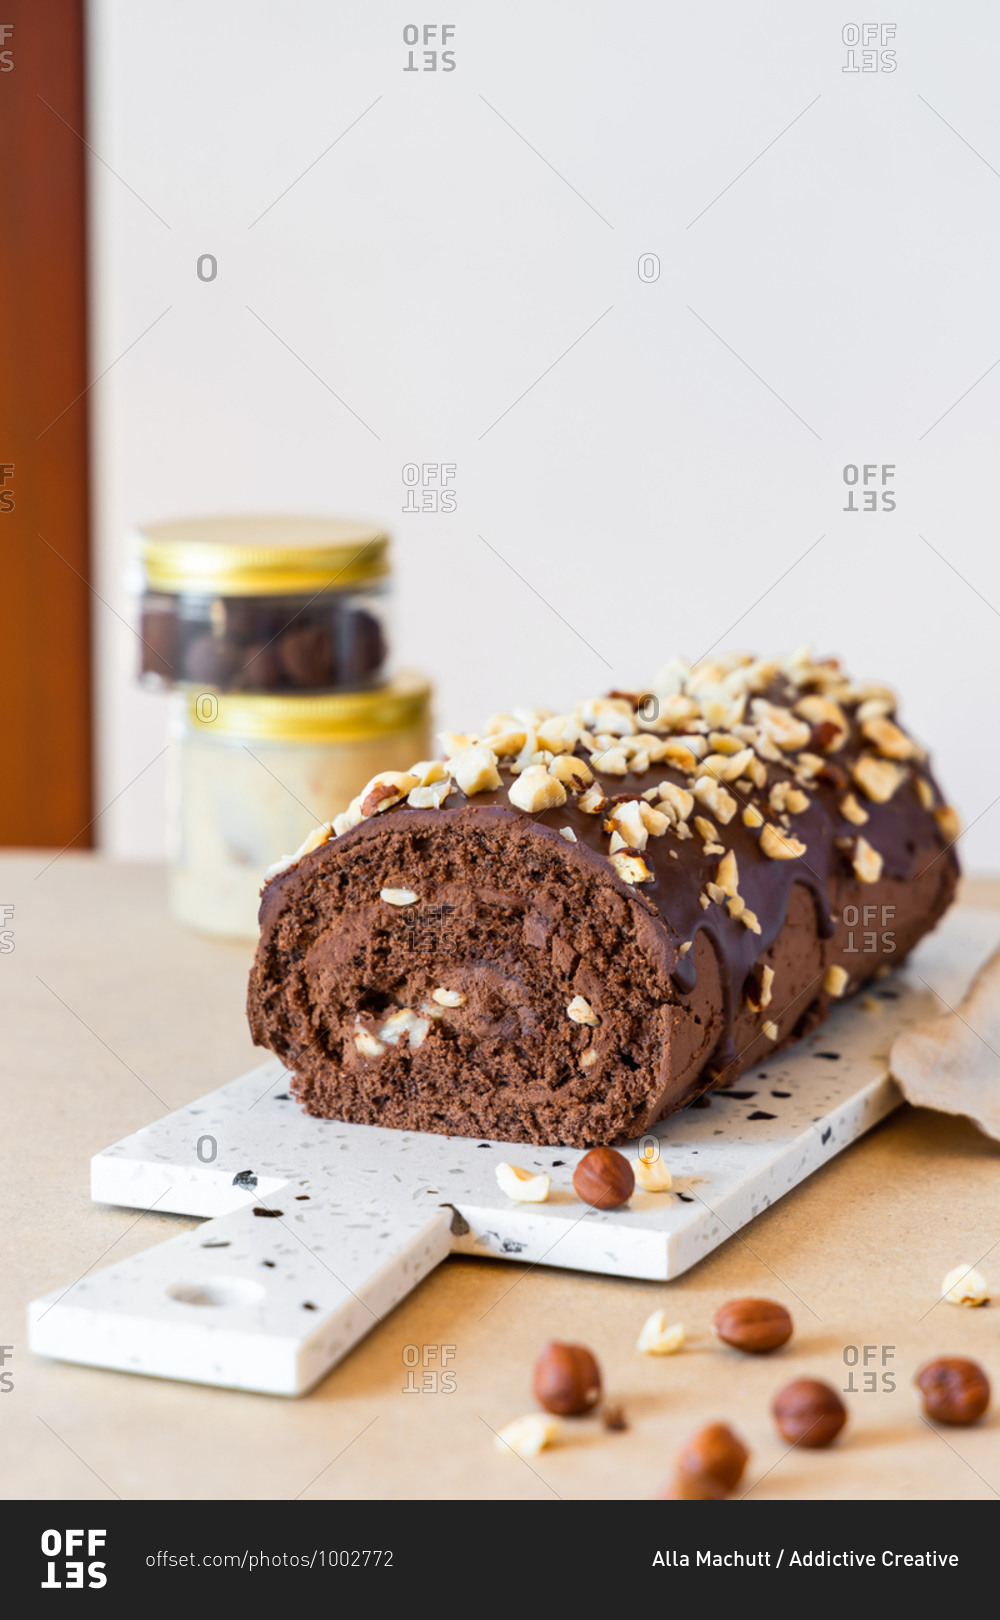 Delicious homemade roll cake with chocolate glaze and hazelnut placed on chopping board in modern kitchen